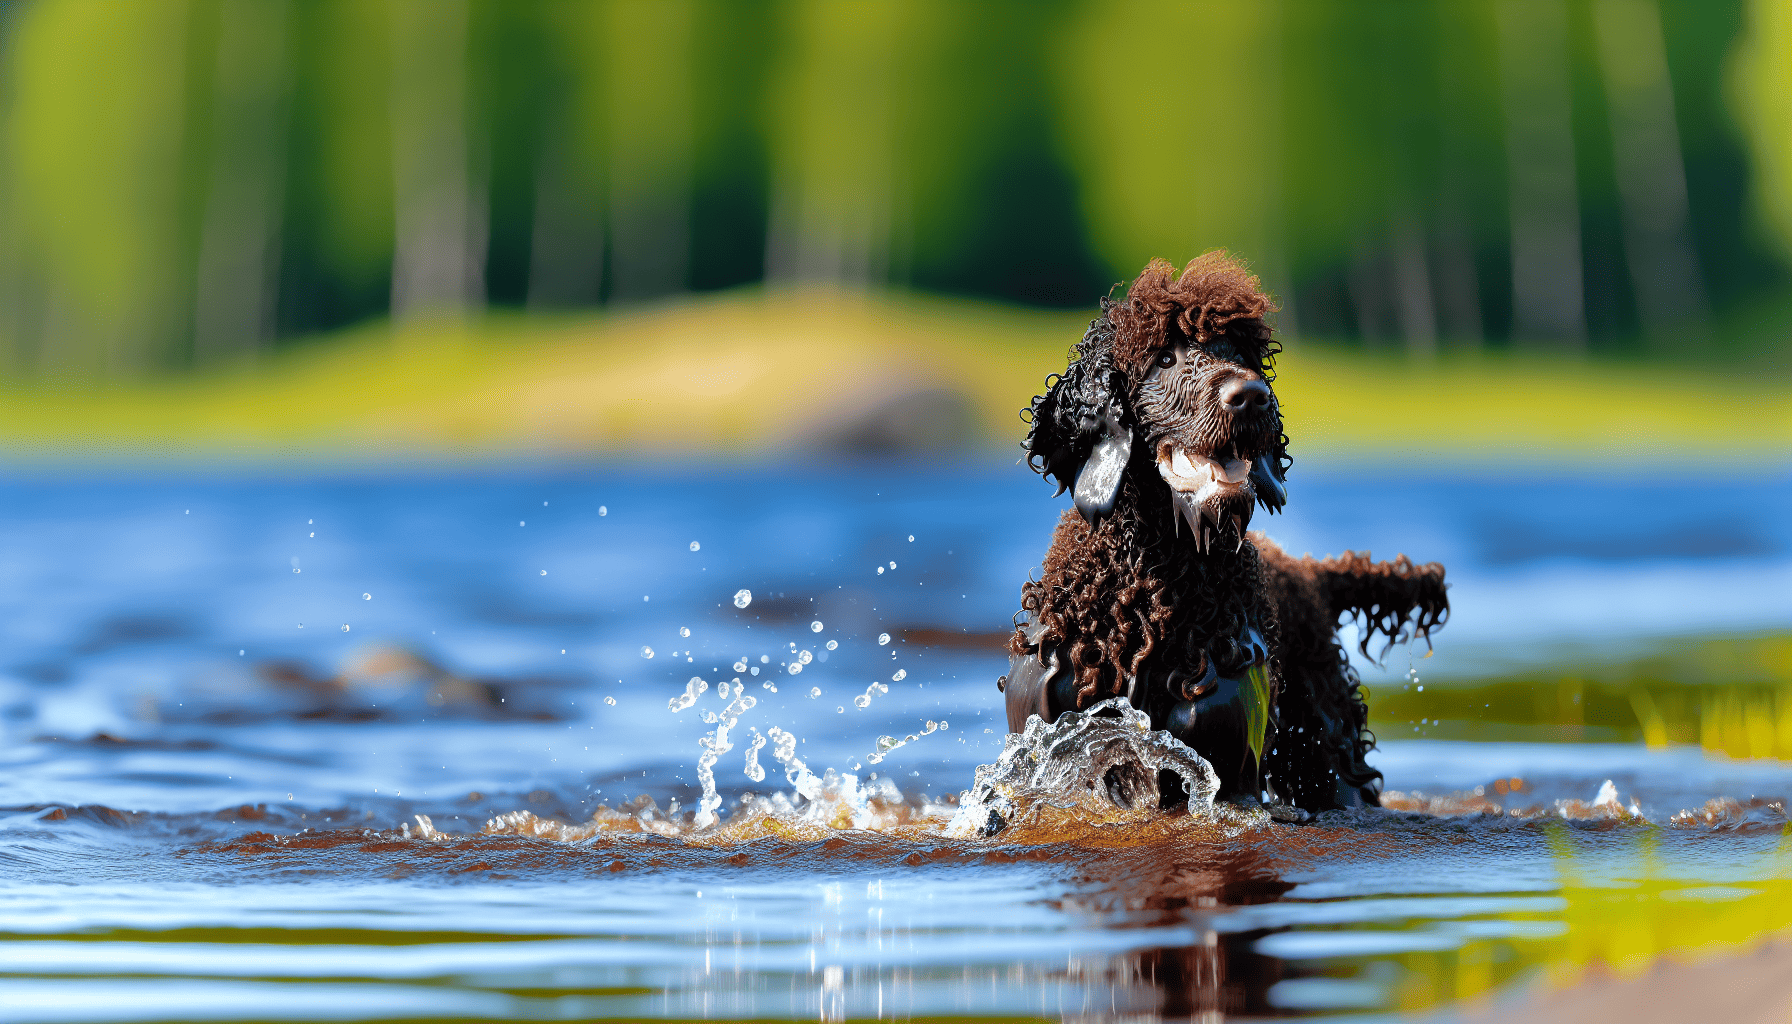 Irish Water Spaniel playing in the water with its curly coat glistening